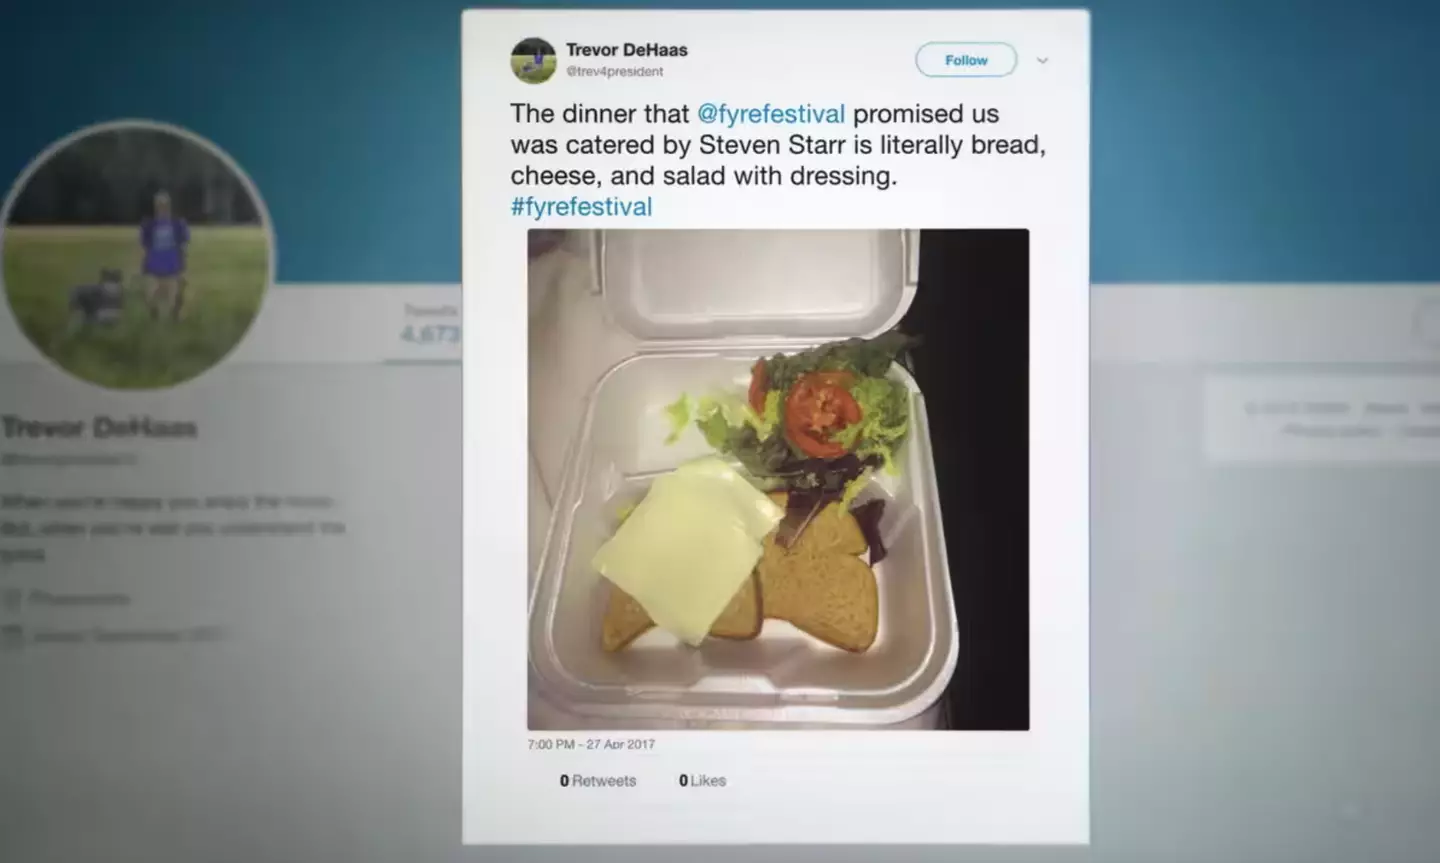 The food served up at Fyre Festival didn’t quite meet the standards promised.